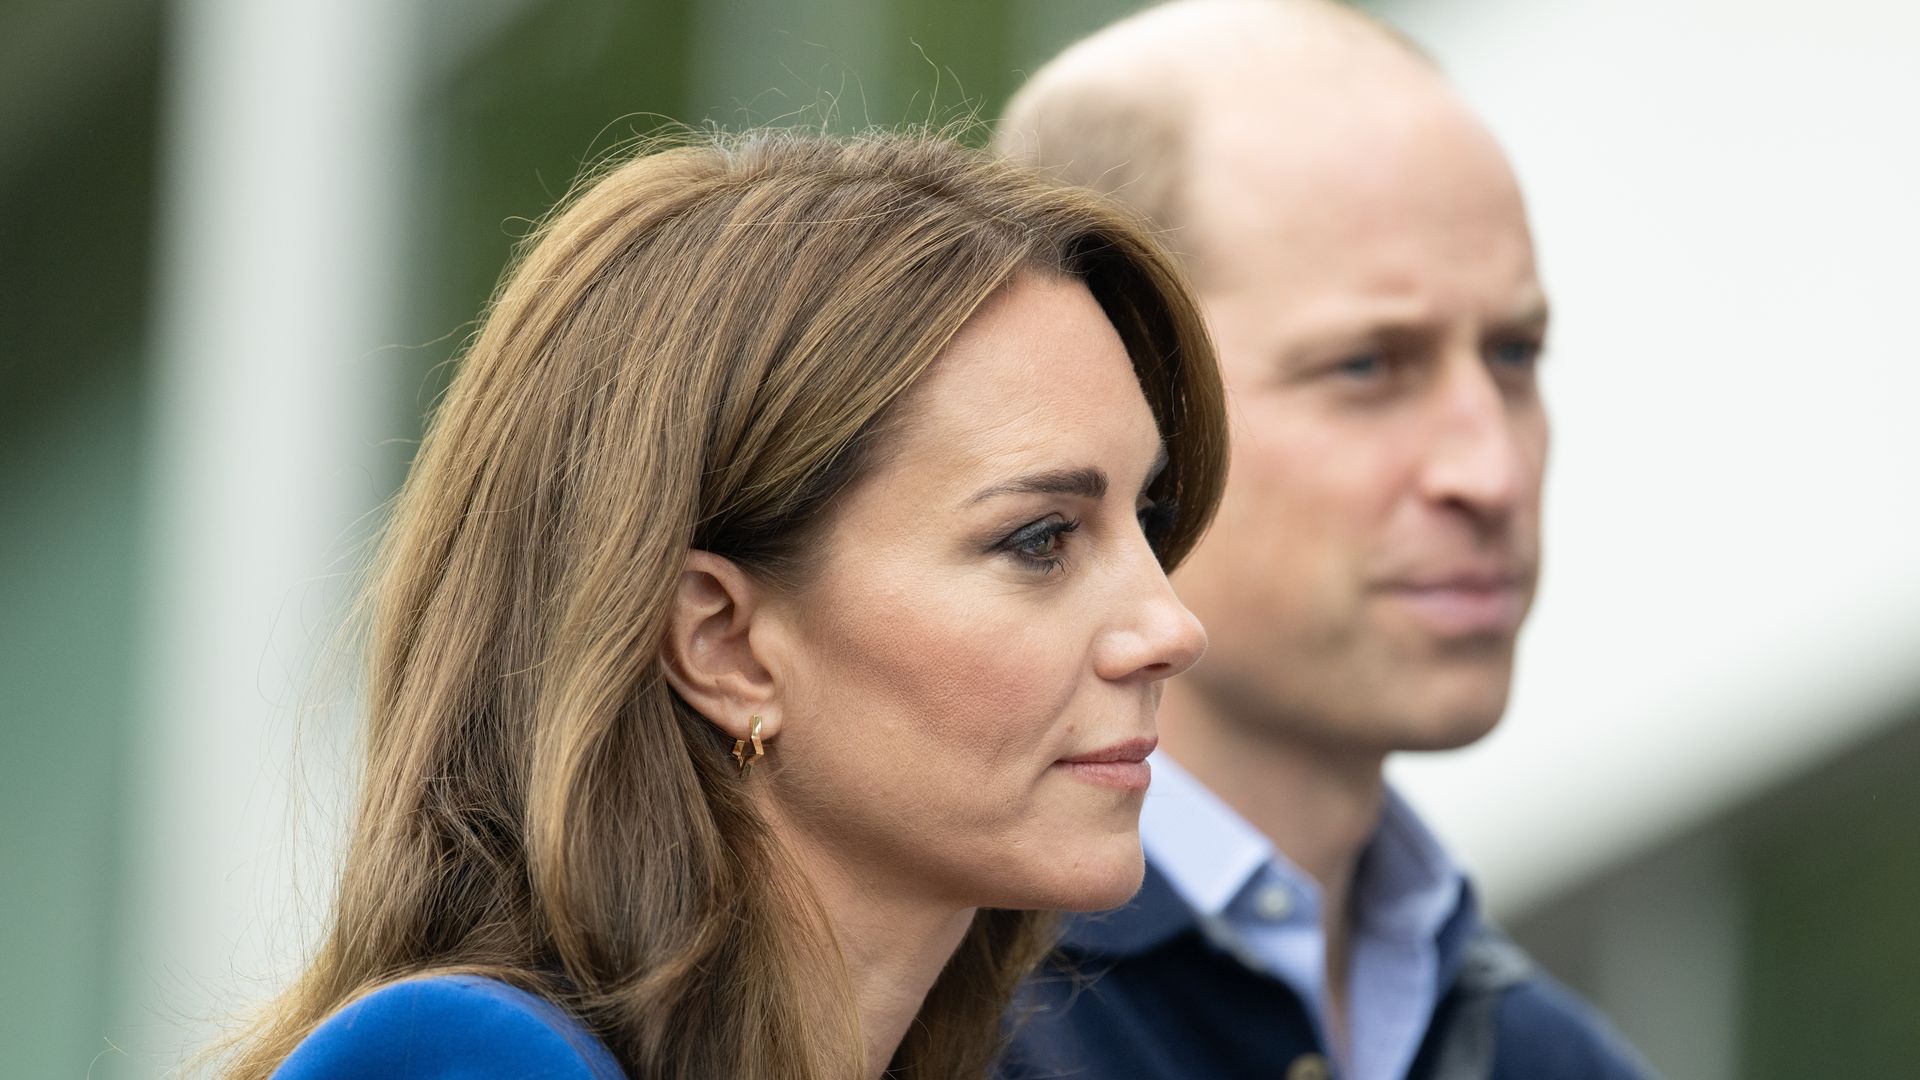 Princess Kate and Prince William looking serious